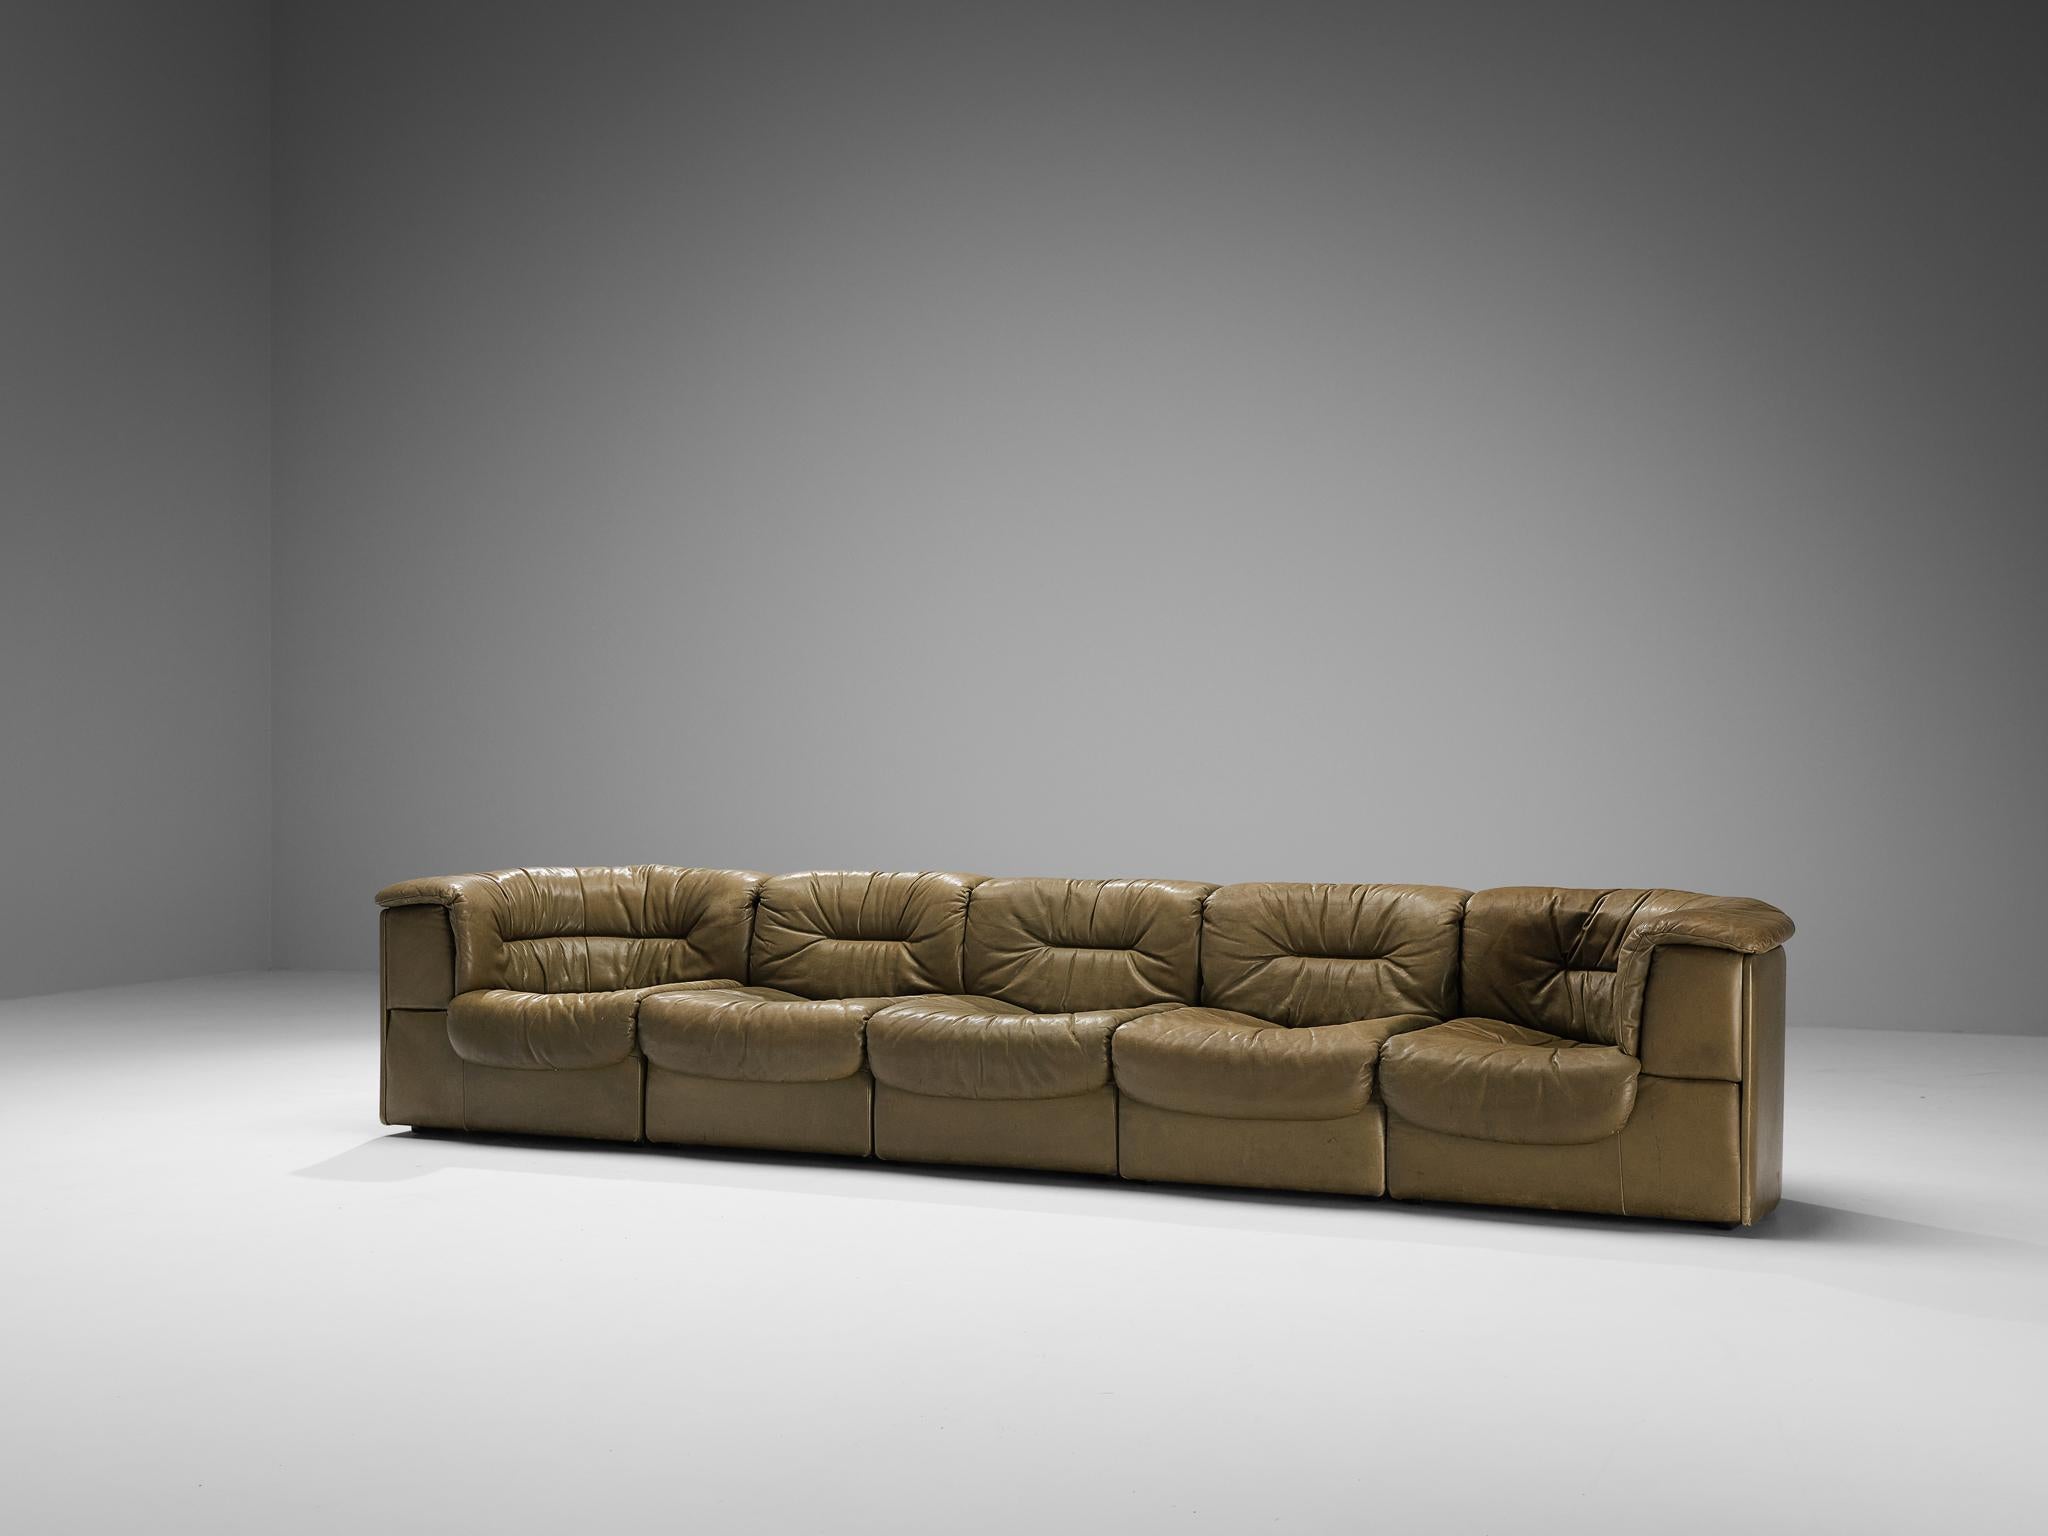 De Sede 'DS-14' Modular Sofa in Patinated Olive Green Leather For Sale 3